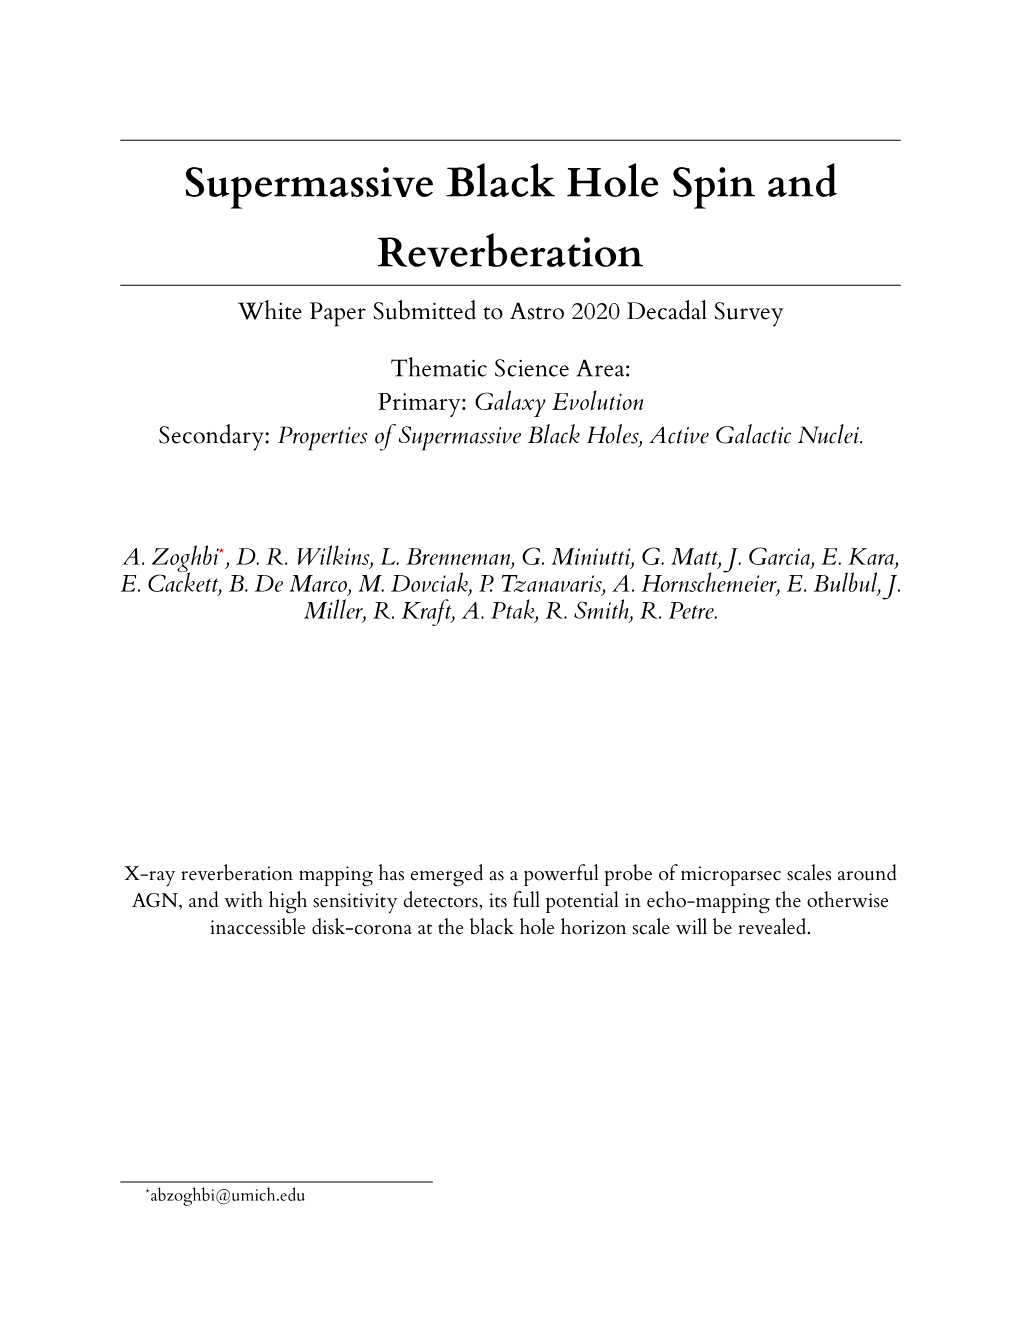 Supermassive Black Hole Spin and Reverberation